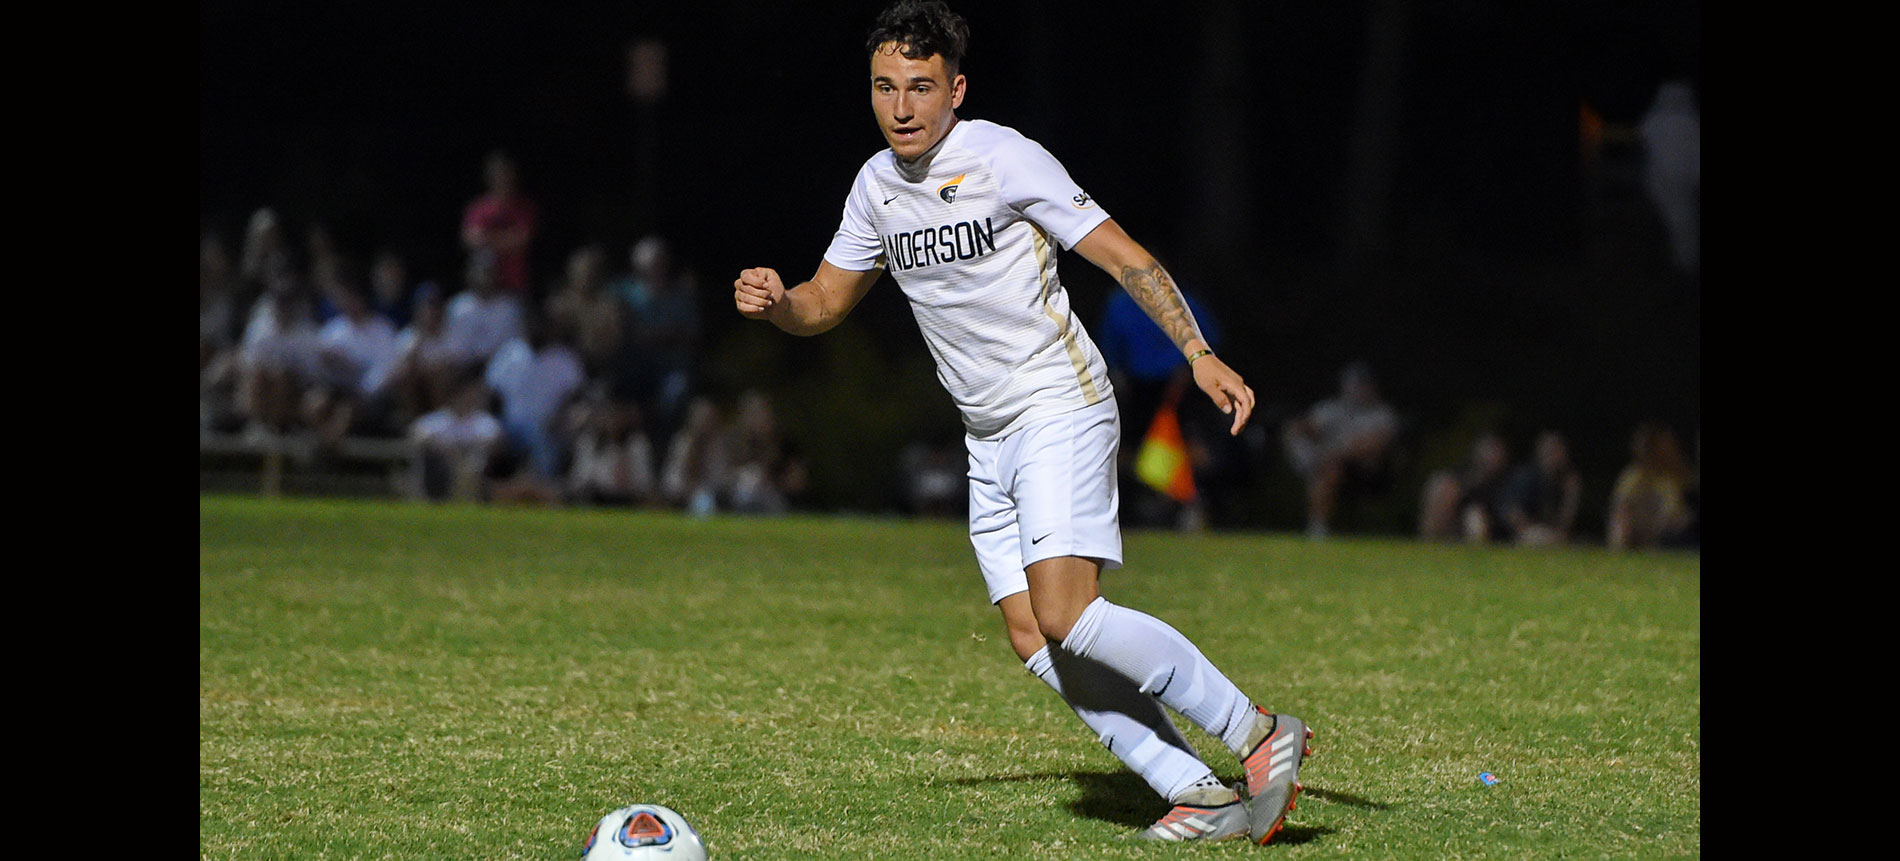 Trojans Advance to SAC Semifinal Match with 3-1 Win Over Tusculum